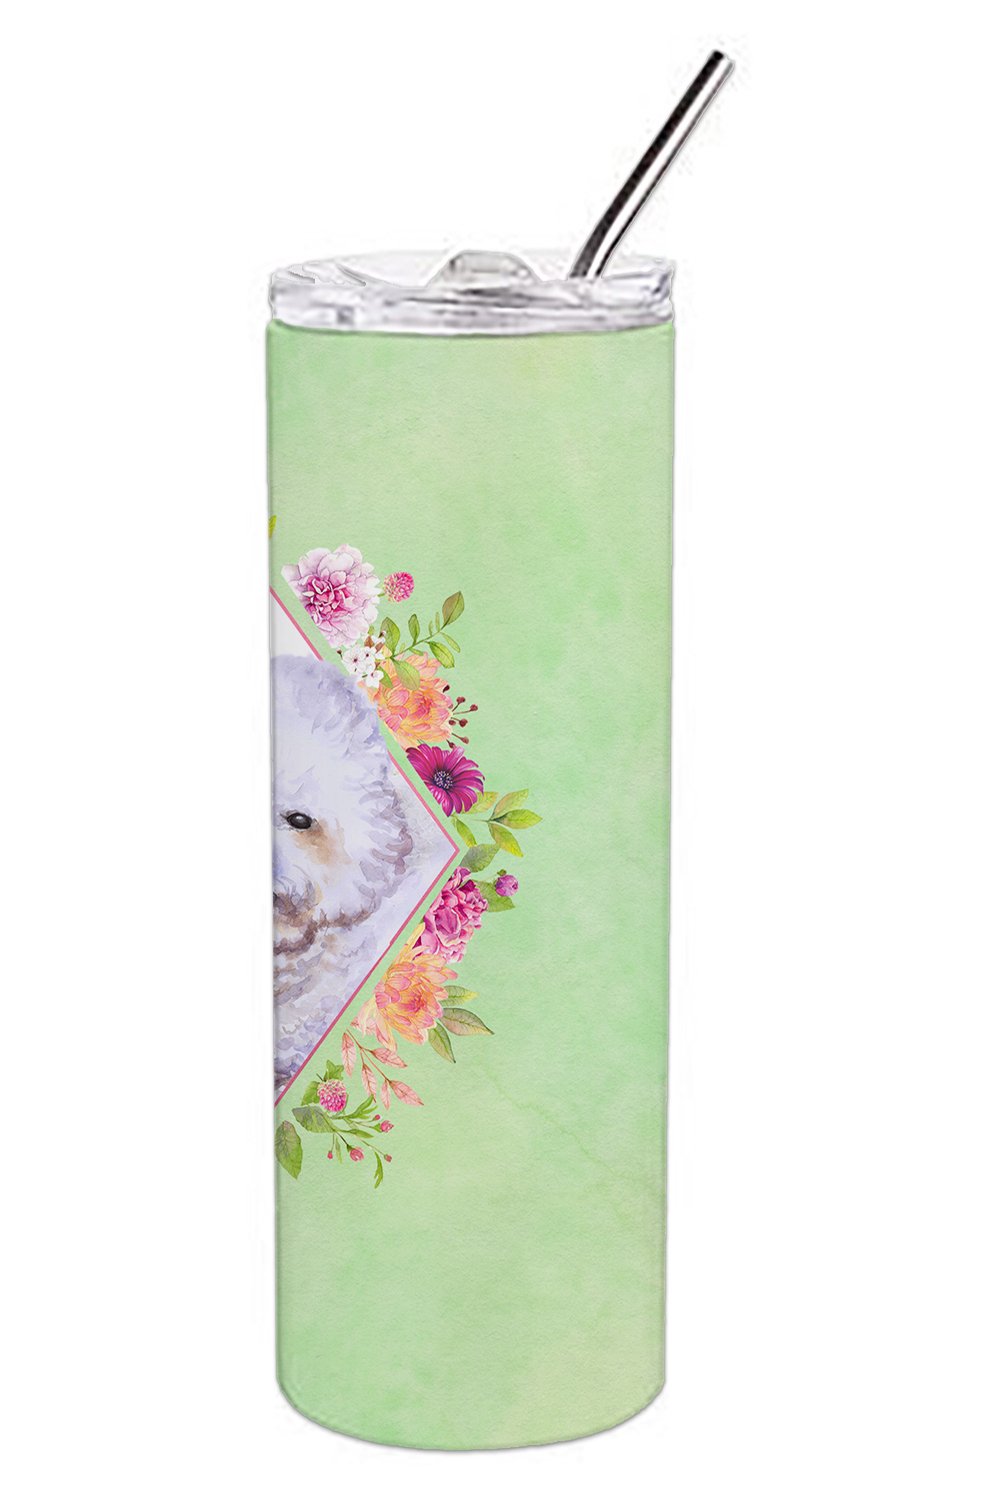 Bichon Frisé #2 Green Flowers Double Walled Stainless Steel 20 oz Skinny Tumbler CK4280TBL20 by Caroline's Treasures